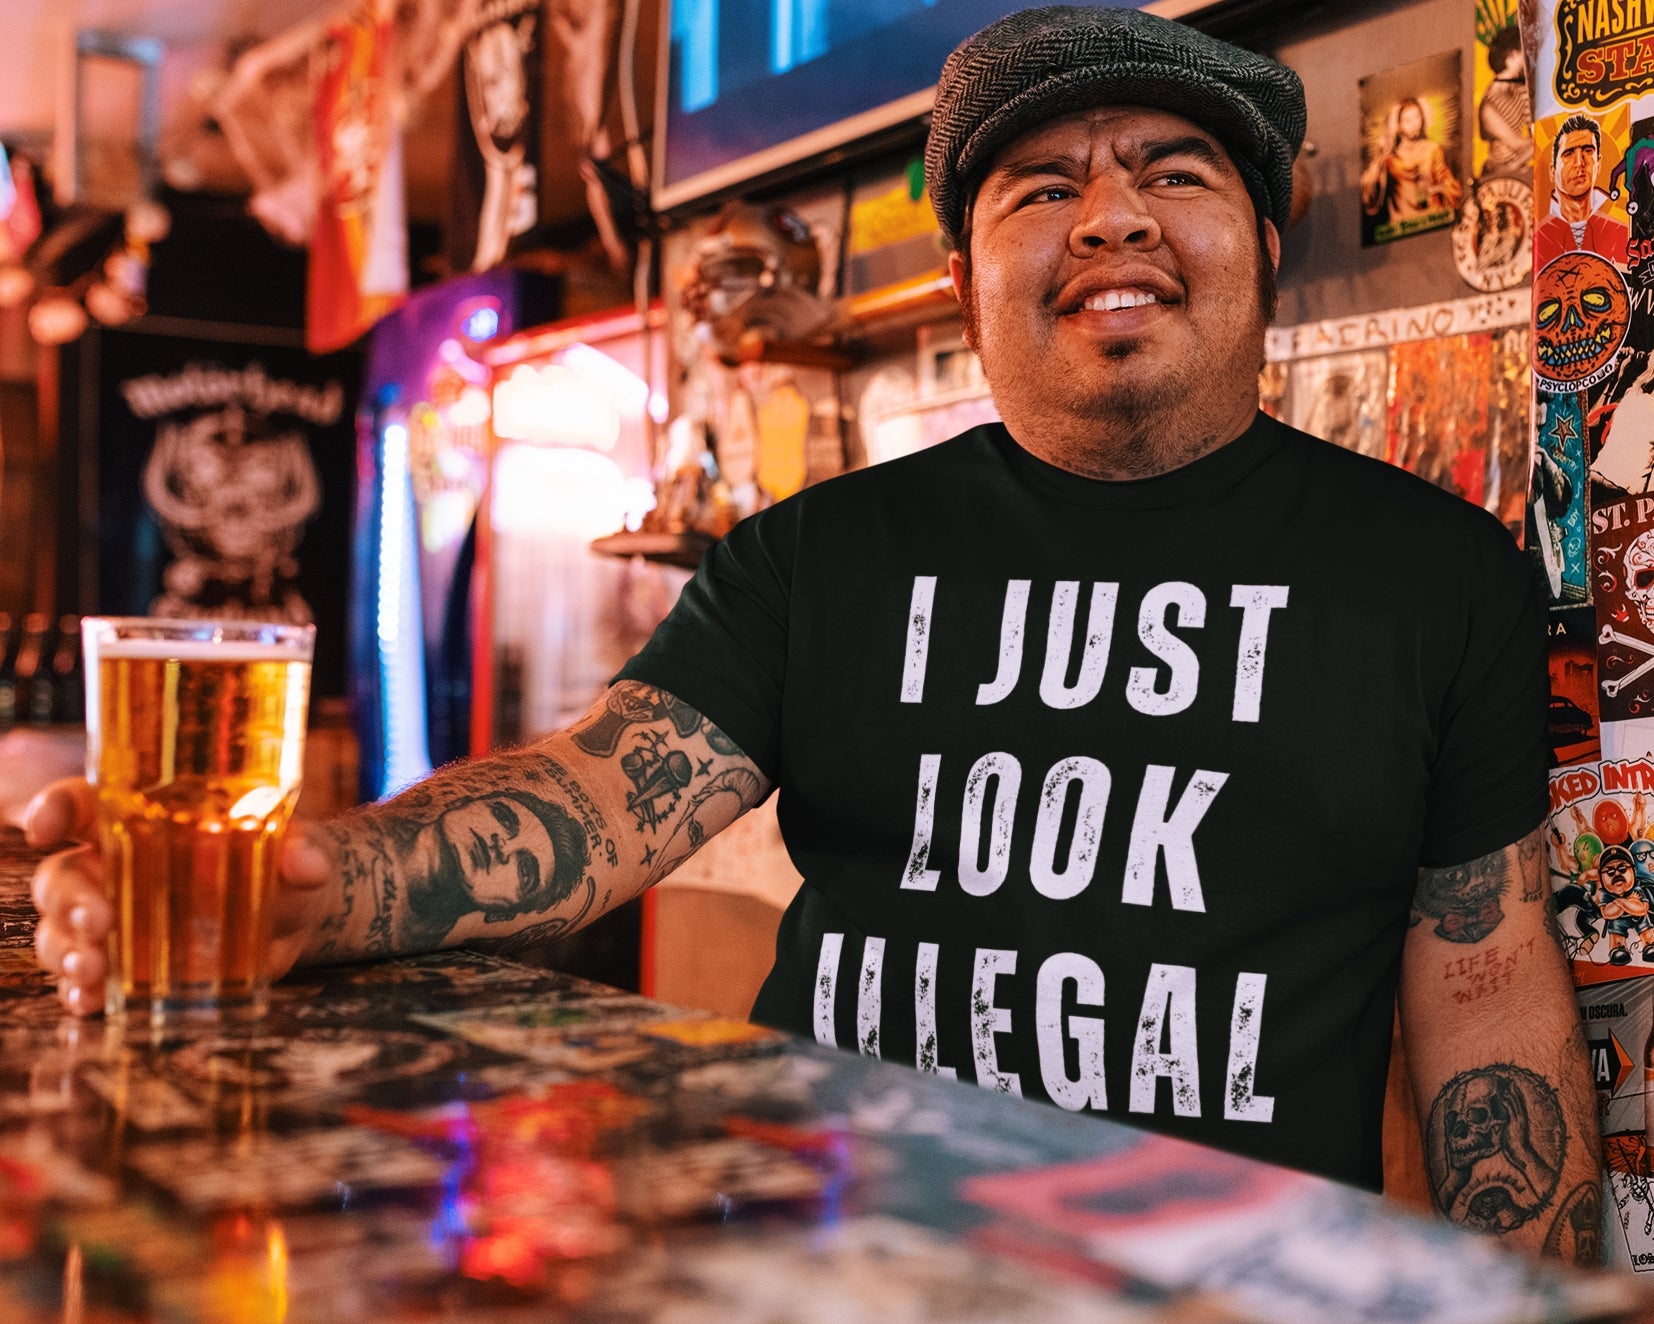 Mexican man standing behind a bar and holding a glass of beer.  The man is wearing a funny black t-shirt for Latinos and Mexican Americans.  The faded, vintage-style lettering reads "I just Look Illegal"